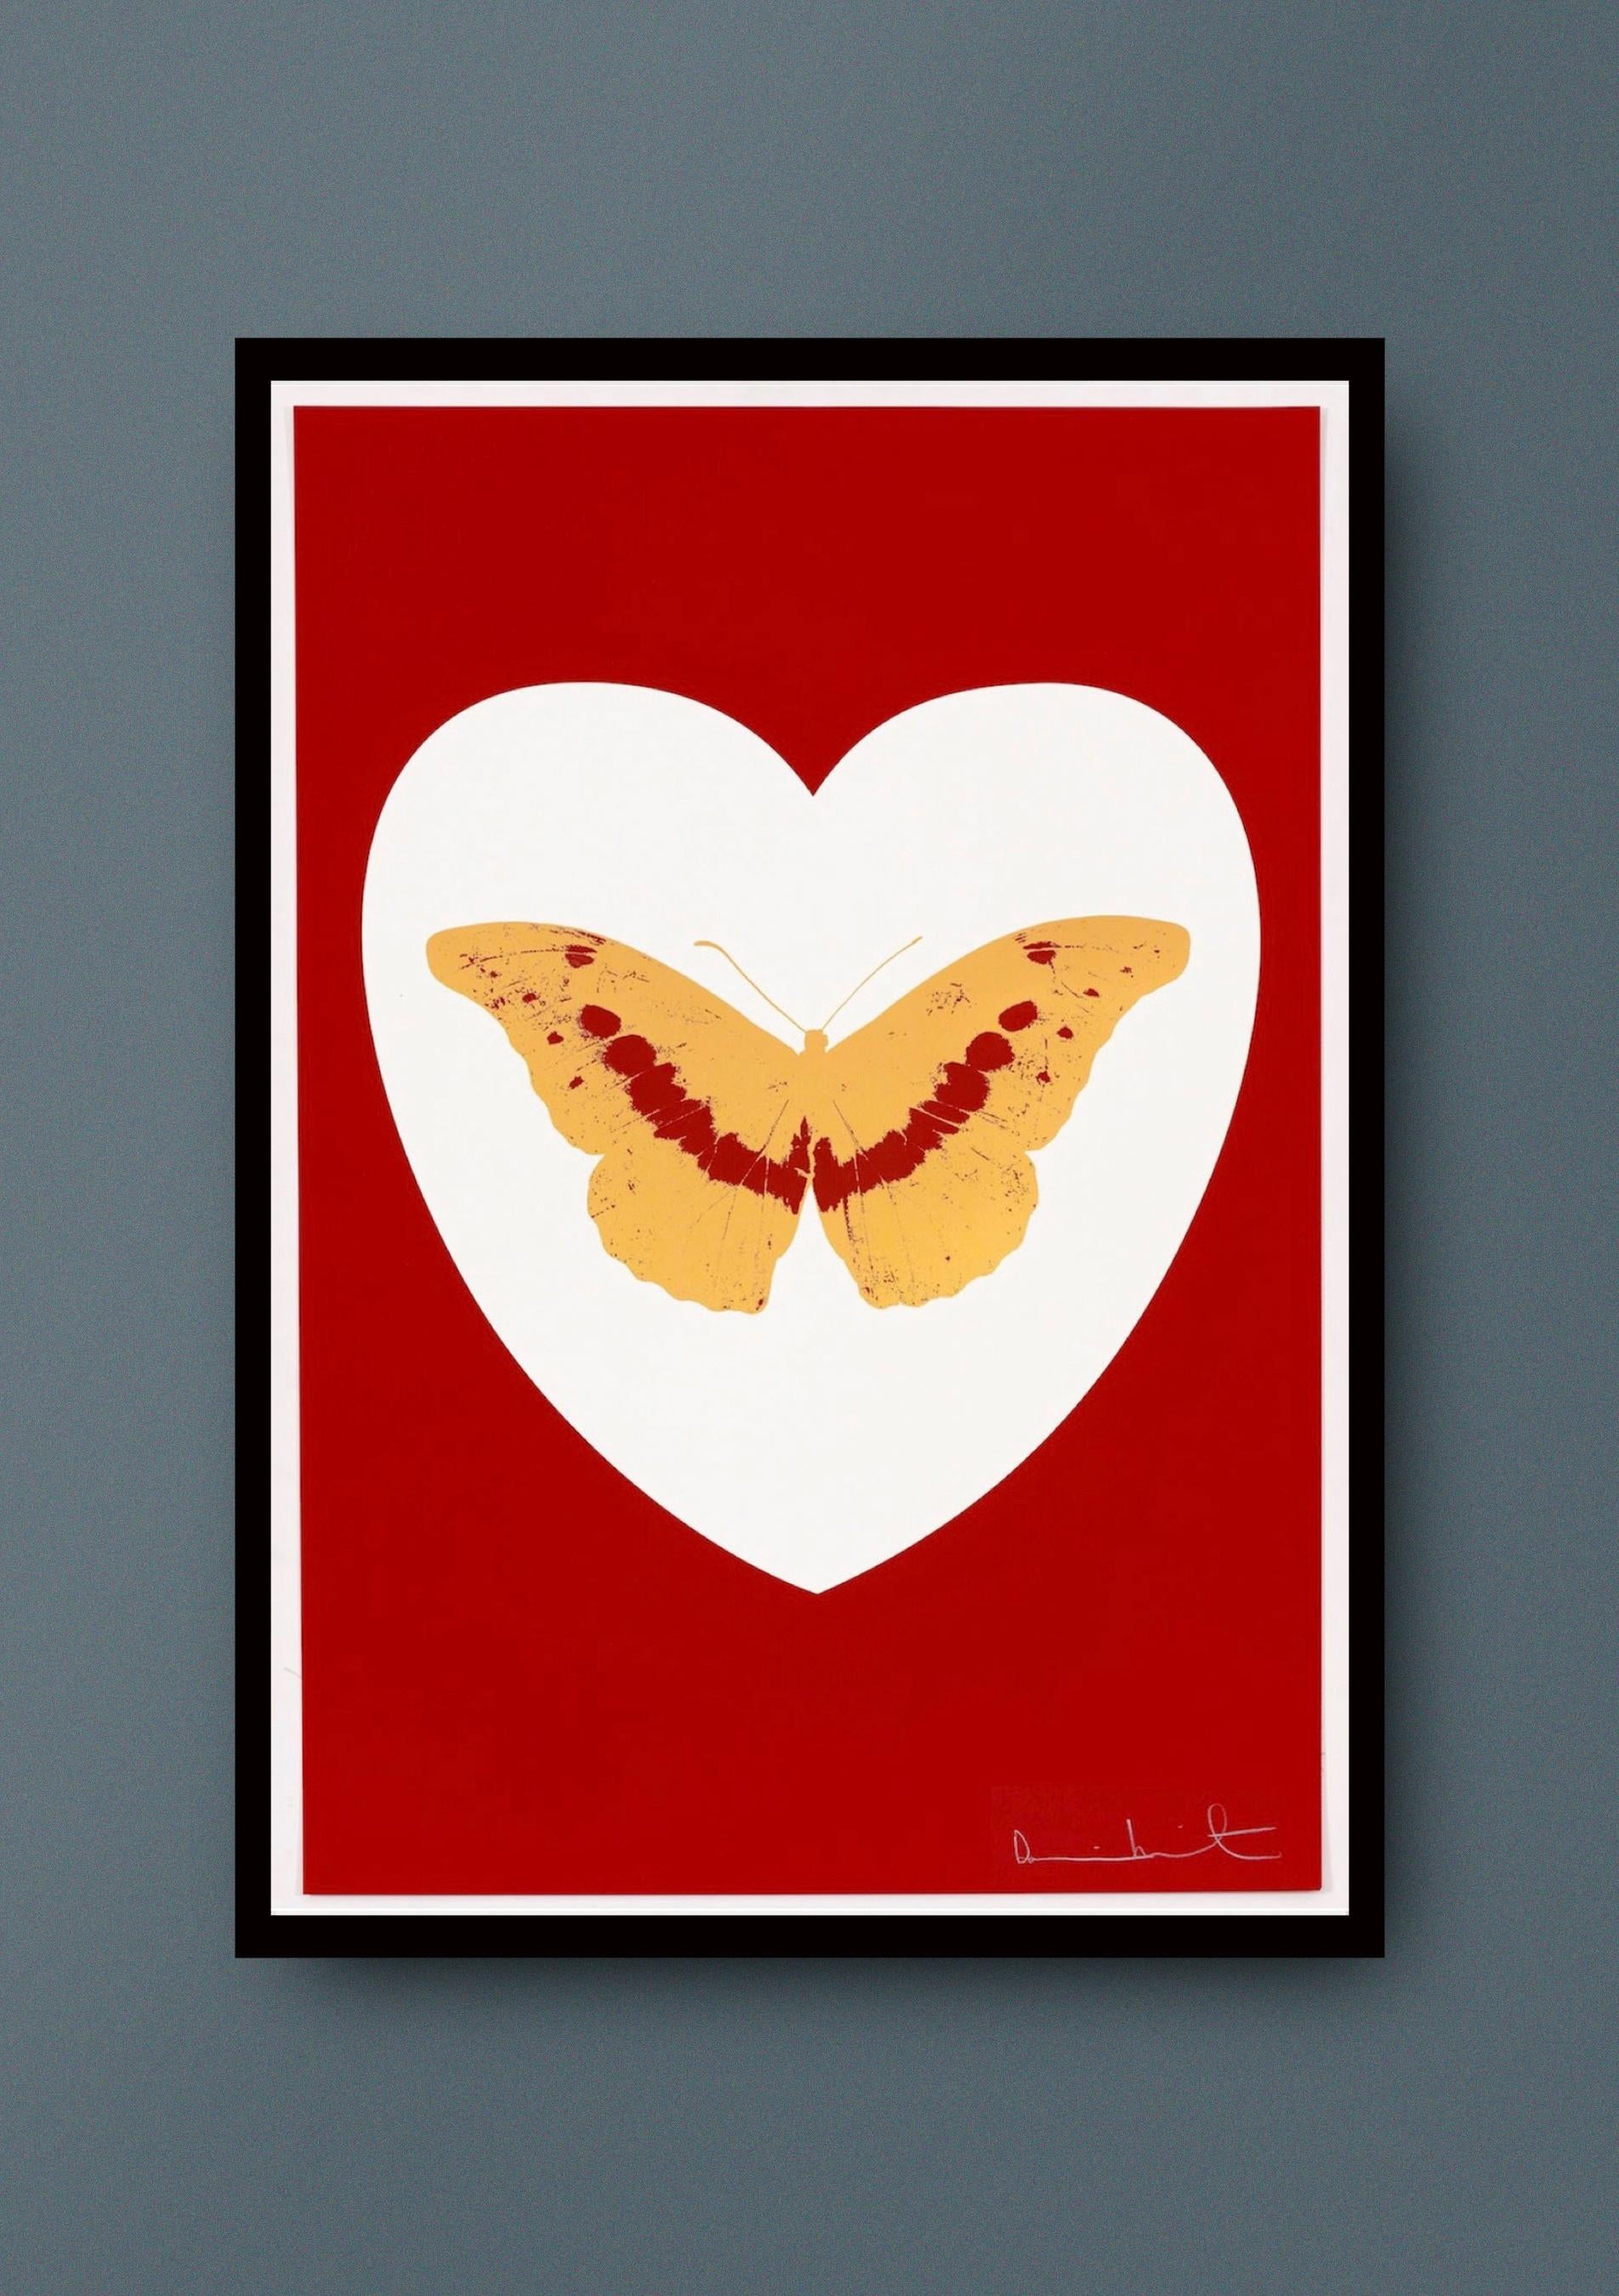 Butterfly - I Love  you  - Print by Damien Hirst